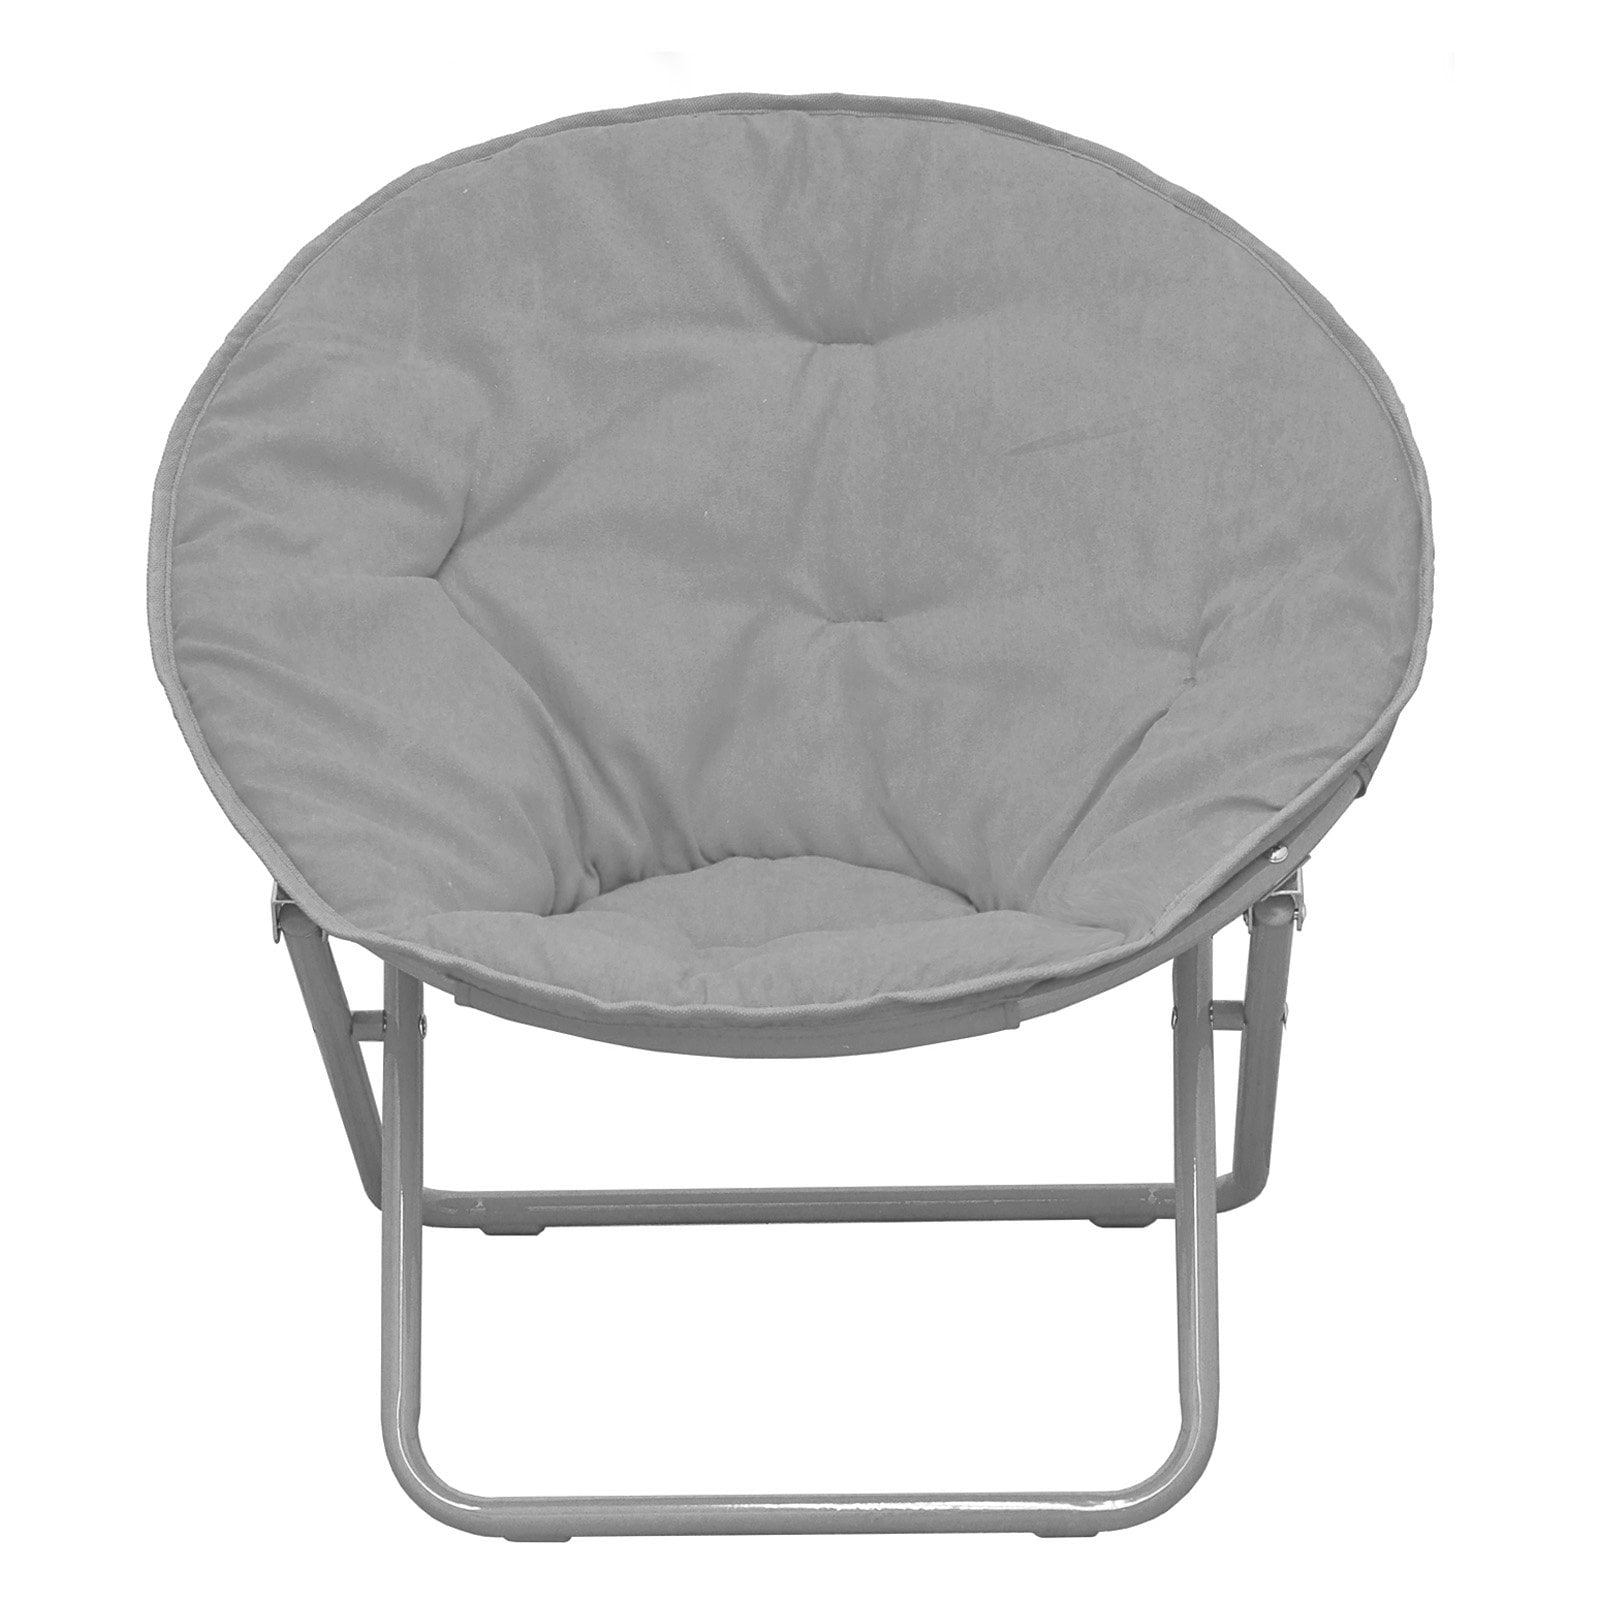 saucer chair for toddlers